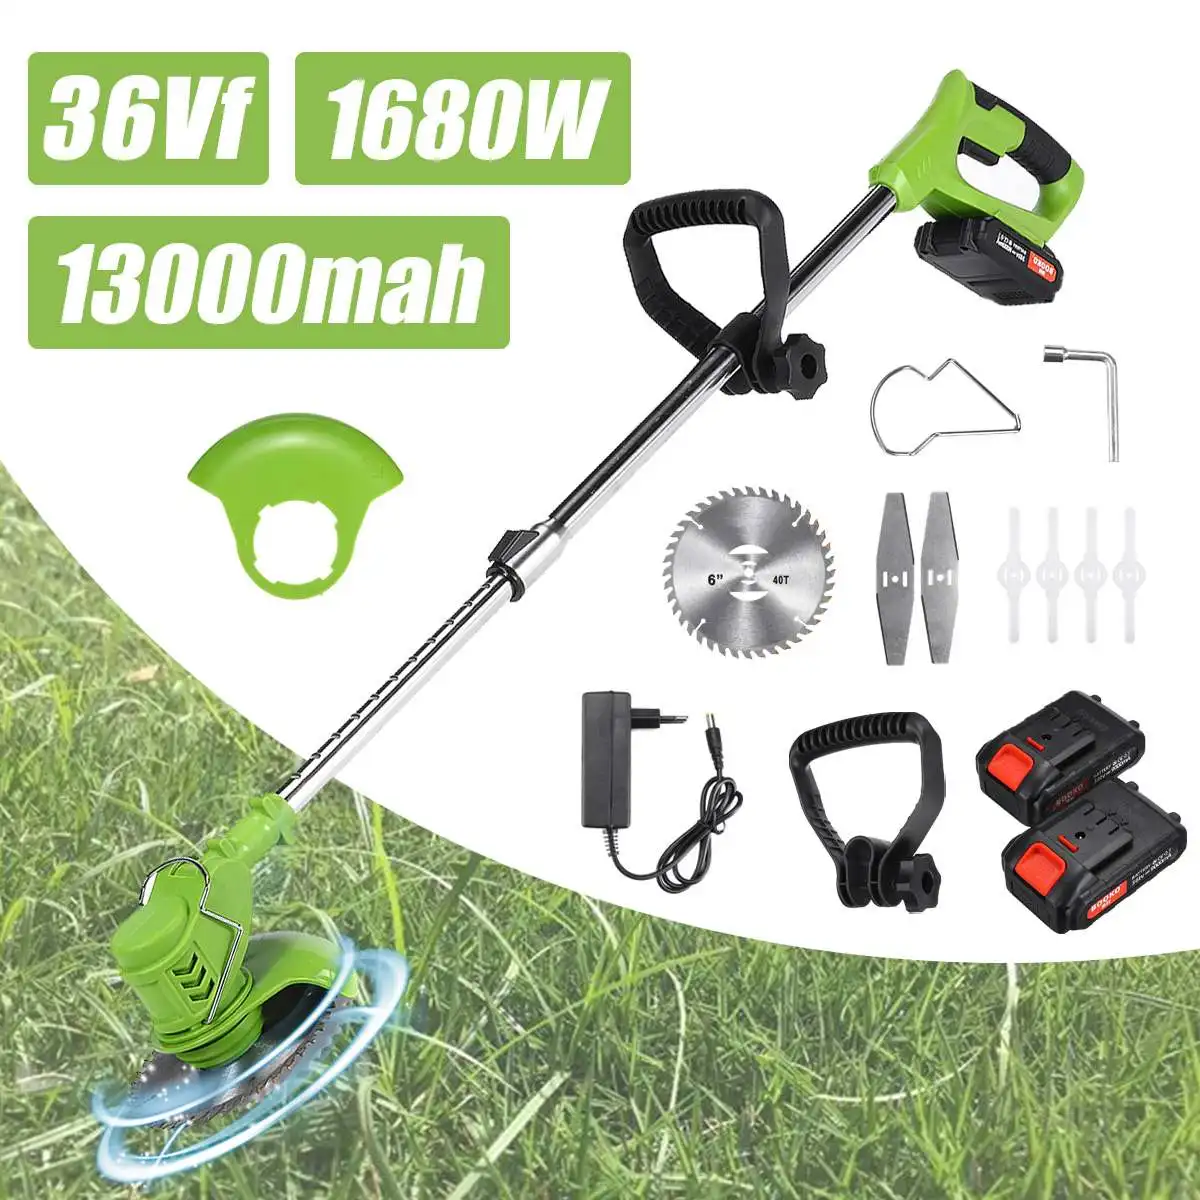 36Vf Electric Grass Trimmer Powerful Trimmers Brush Cutter Lawn Mower Cordless Cutting Machine Garden Tool with 2 Li-Ion Battery